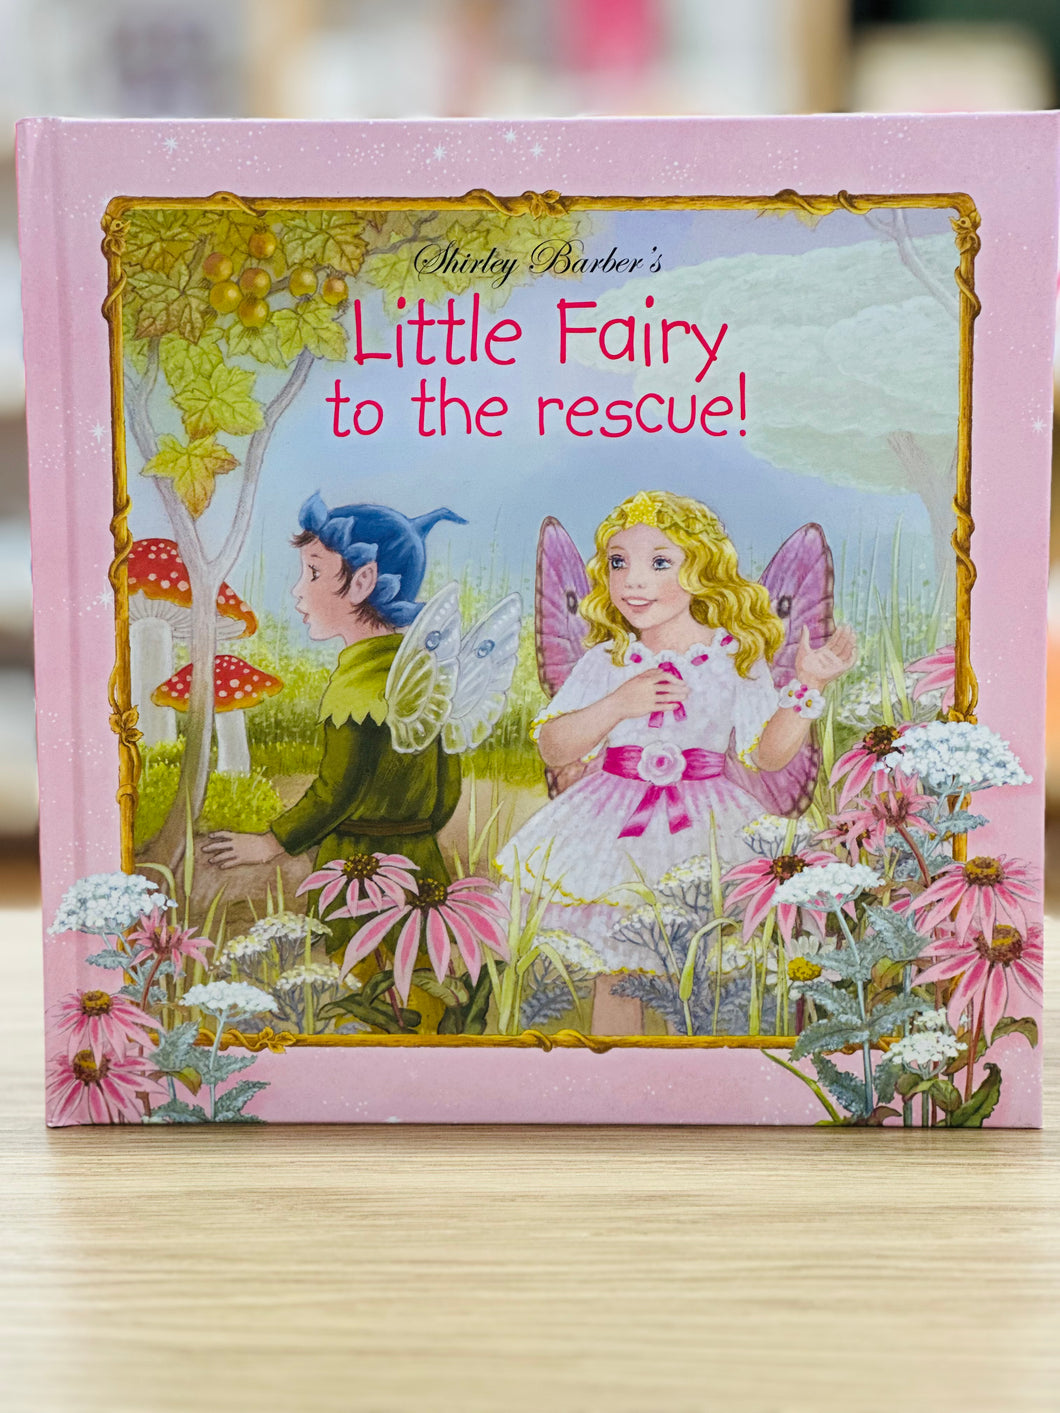 Little Fairy to the Rescue